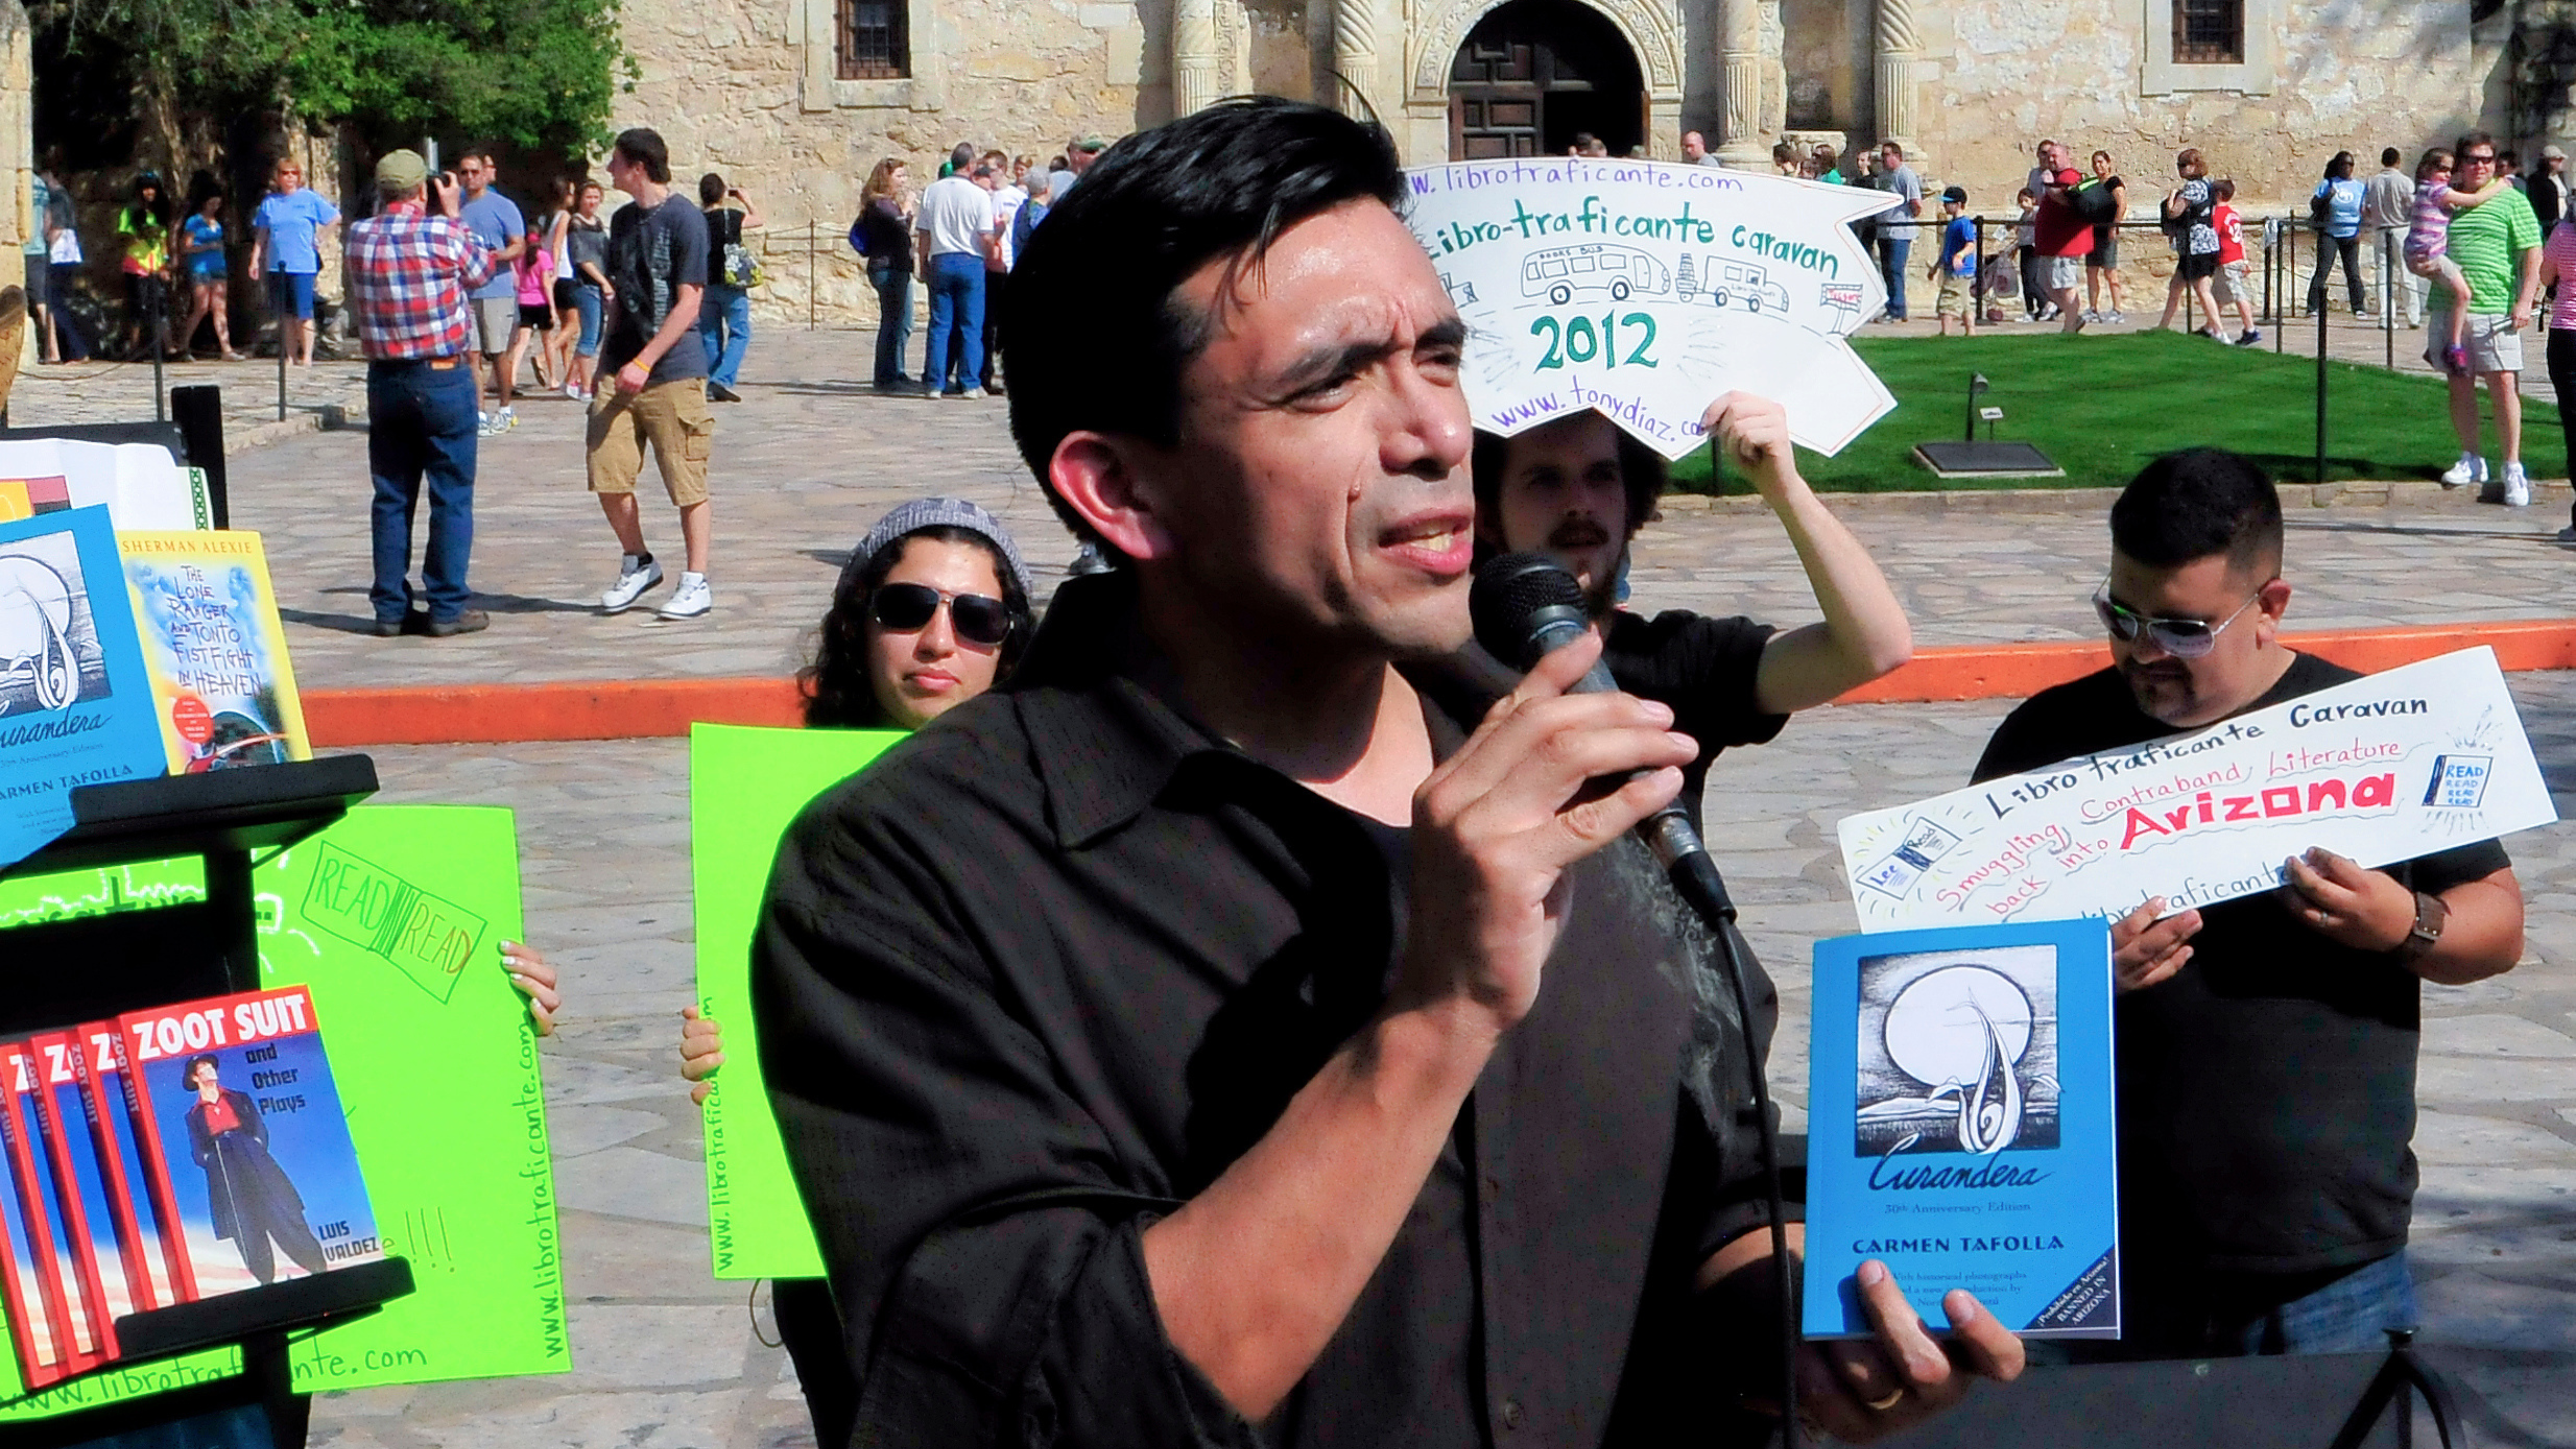 Tony Diaz, a Chicano man with short dark hair and wearing a dark shirt, speaks into a microphone at a protest against book bans at the Alamo.